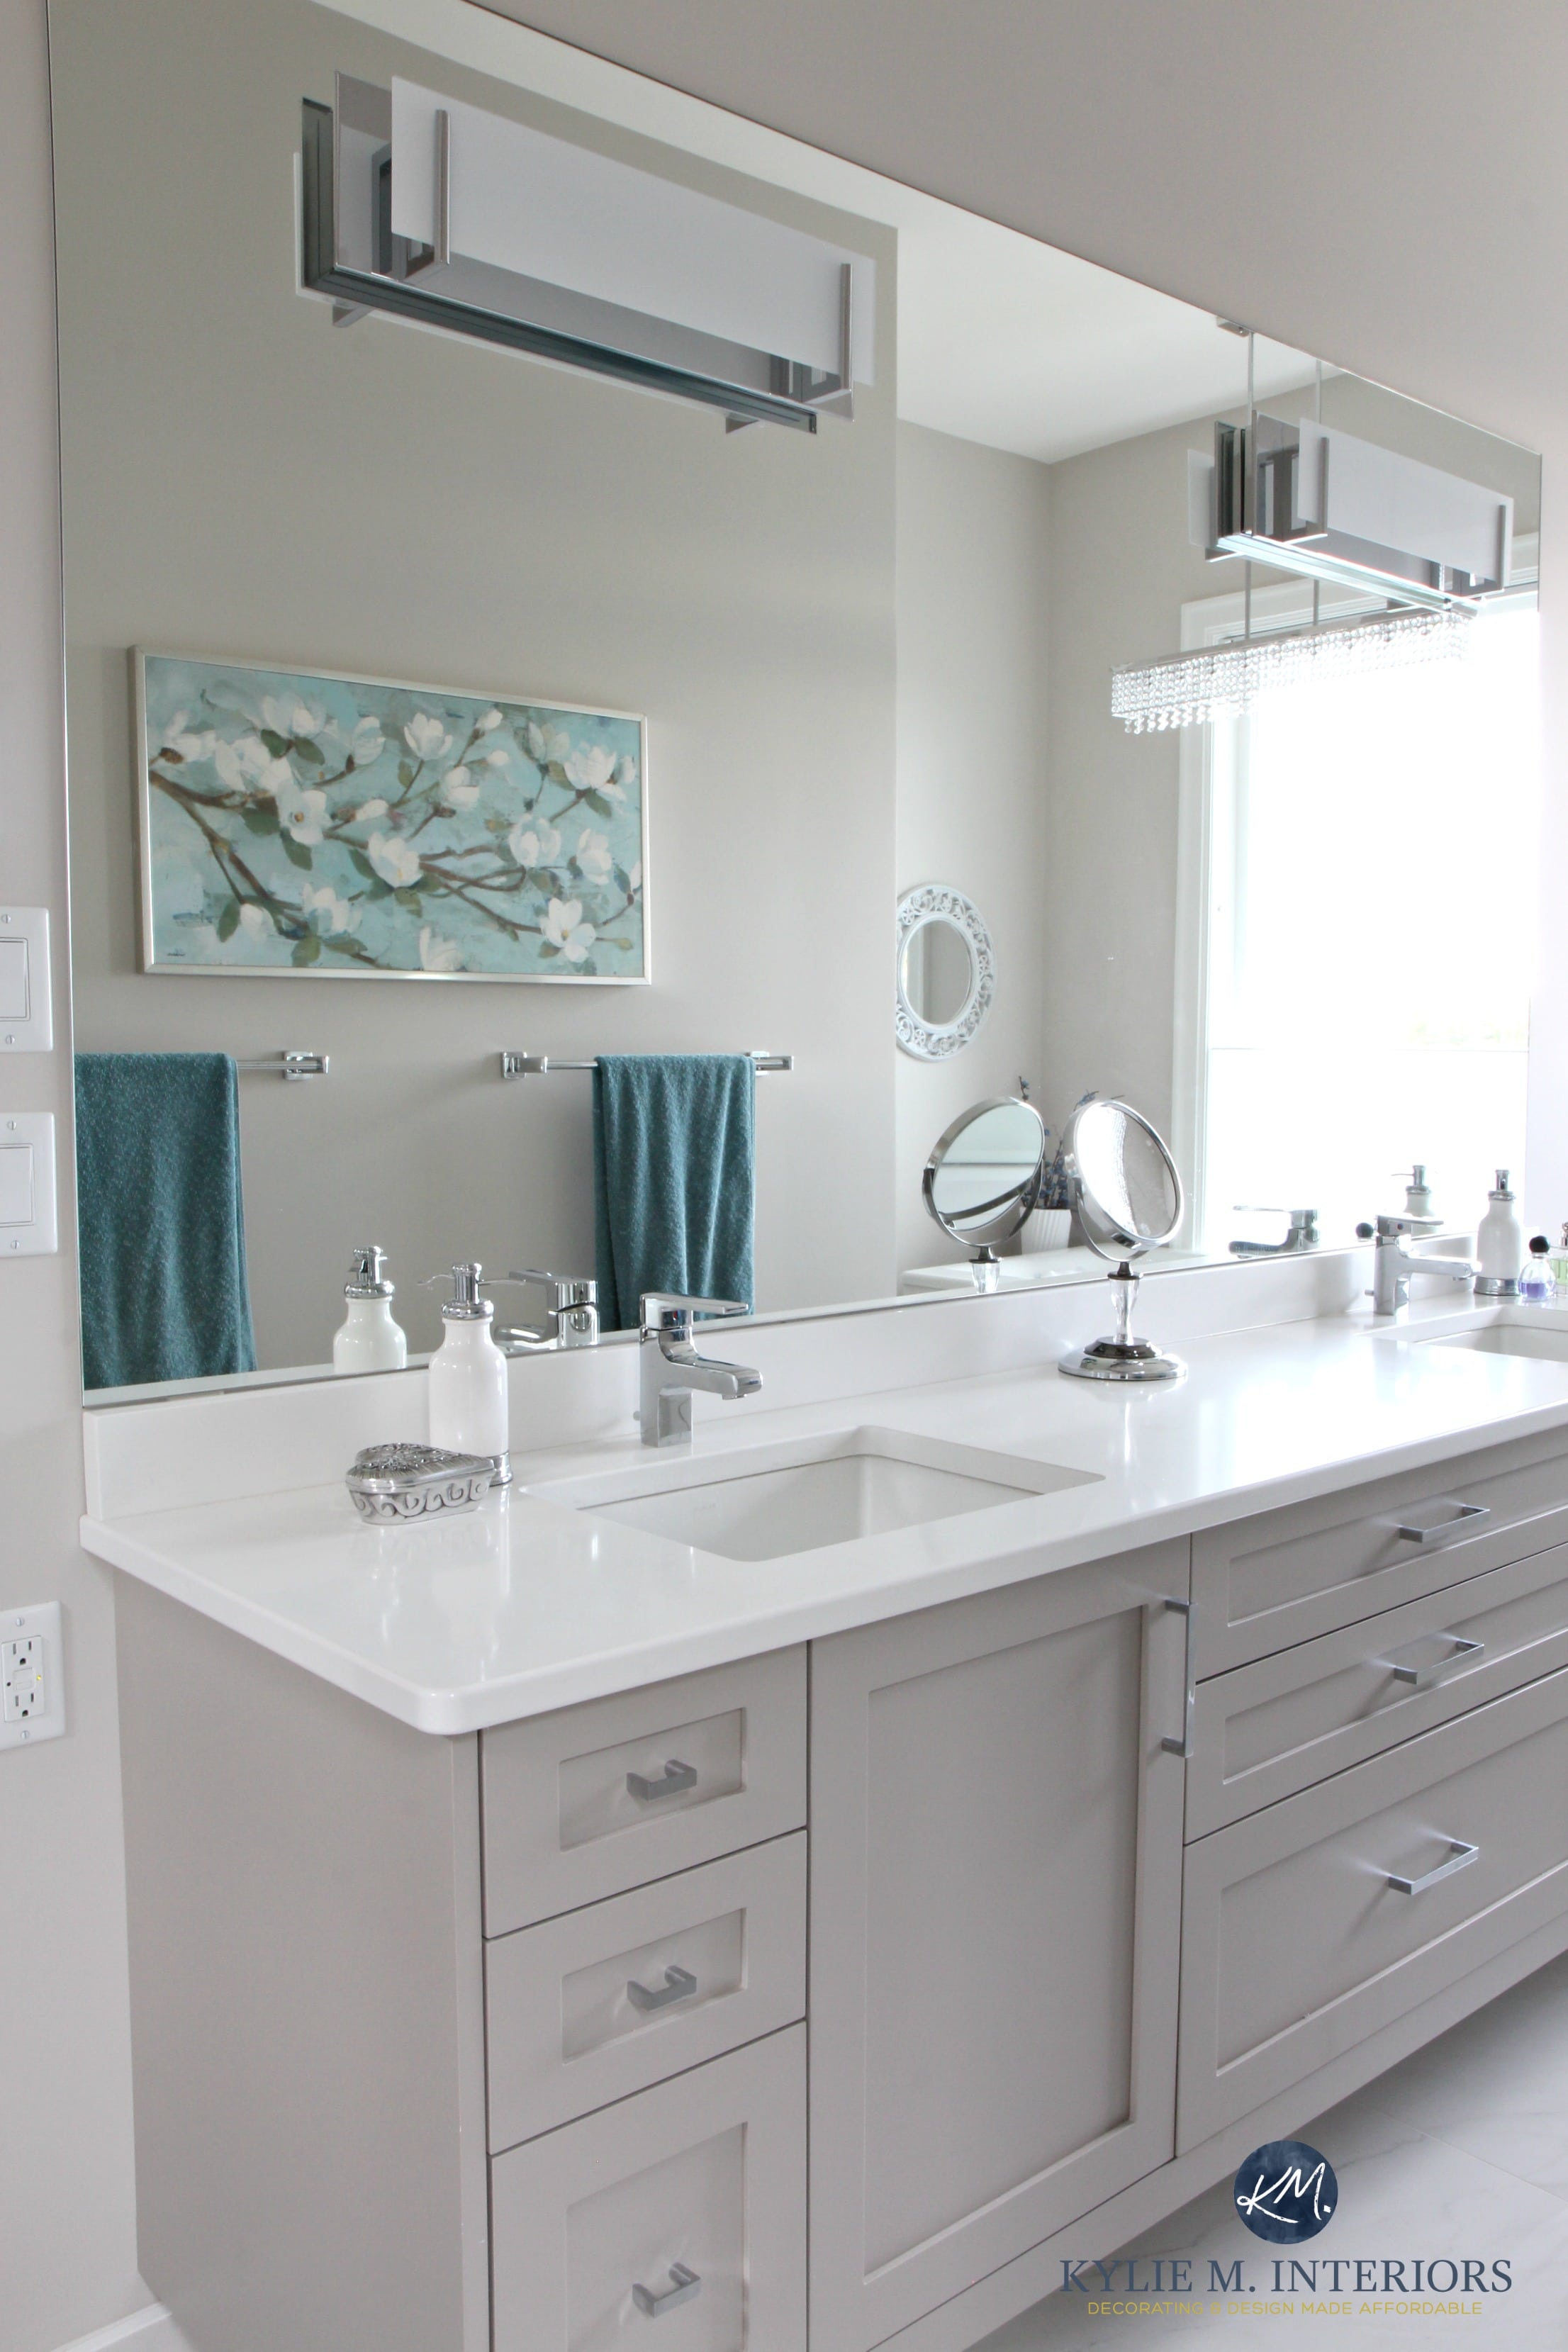 Master bathroom with double vanity painted gray. Cambria Quartz countertop in Kirkstead. Chrome metal accents, Benjamin Moore Balboa mist paint colour. Kylie M Interiors Decorating and D